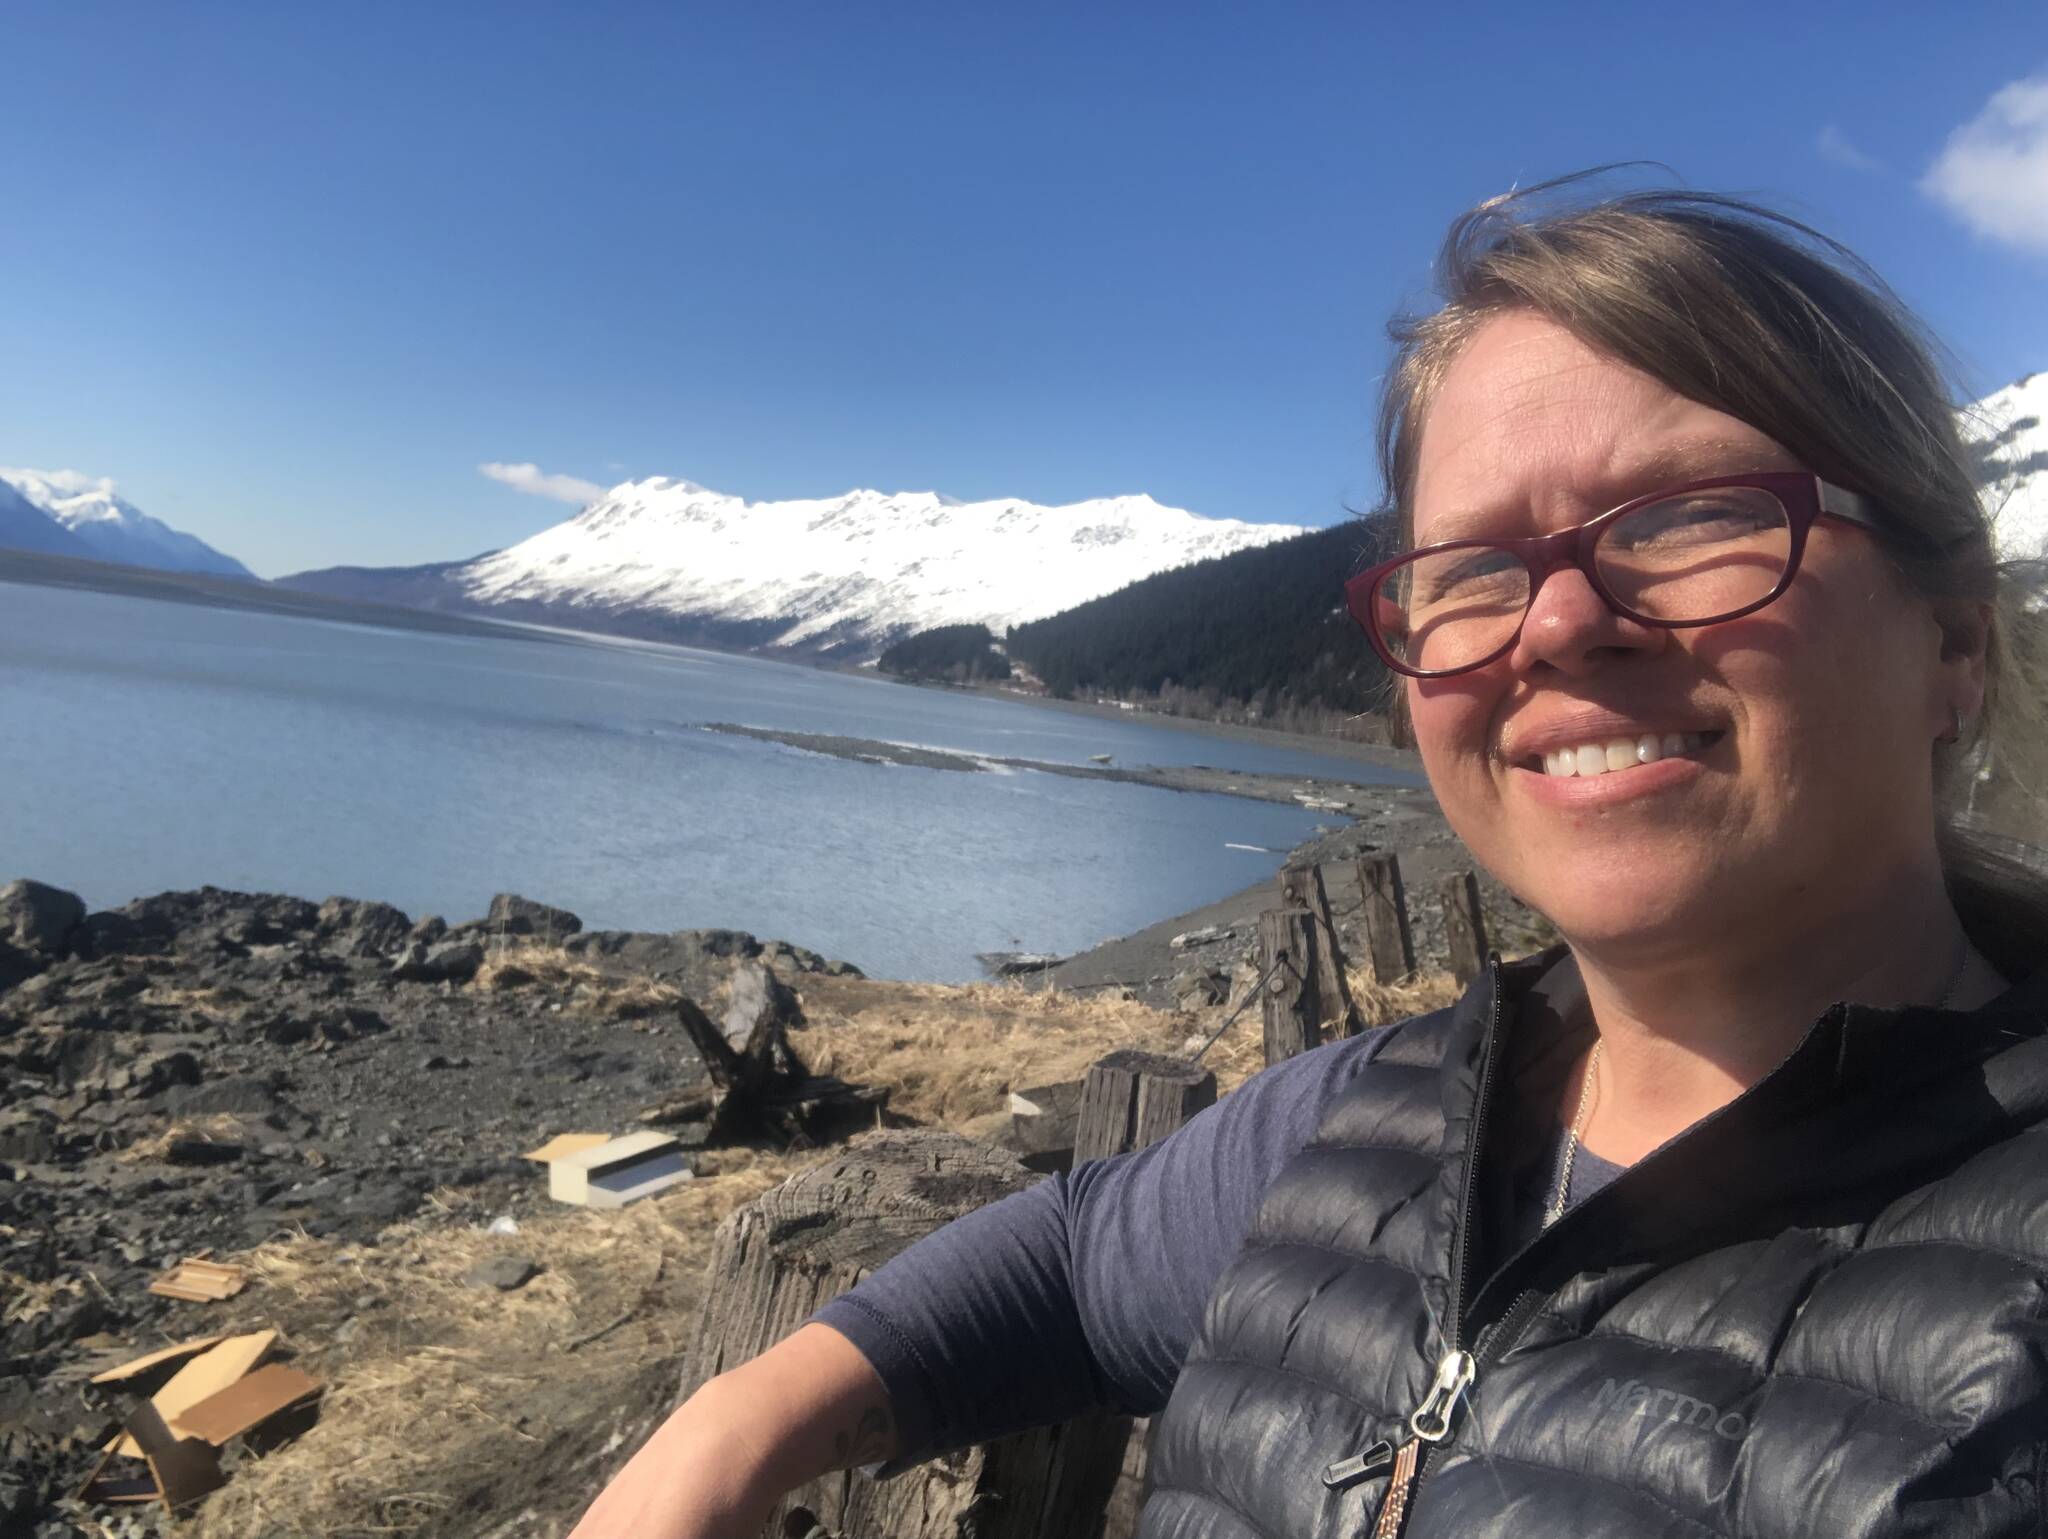 Soldotna resident Karyn Griffin, seen here, has joined the list of candidates vying for Alaska’s newly vacant seat in the U.S. House of Representatives. The seat was formerly held by Rep. Don Young, who died March 18, 2022, after nearly 50 years in office. (Photo courtesy Karyn Griffin)